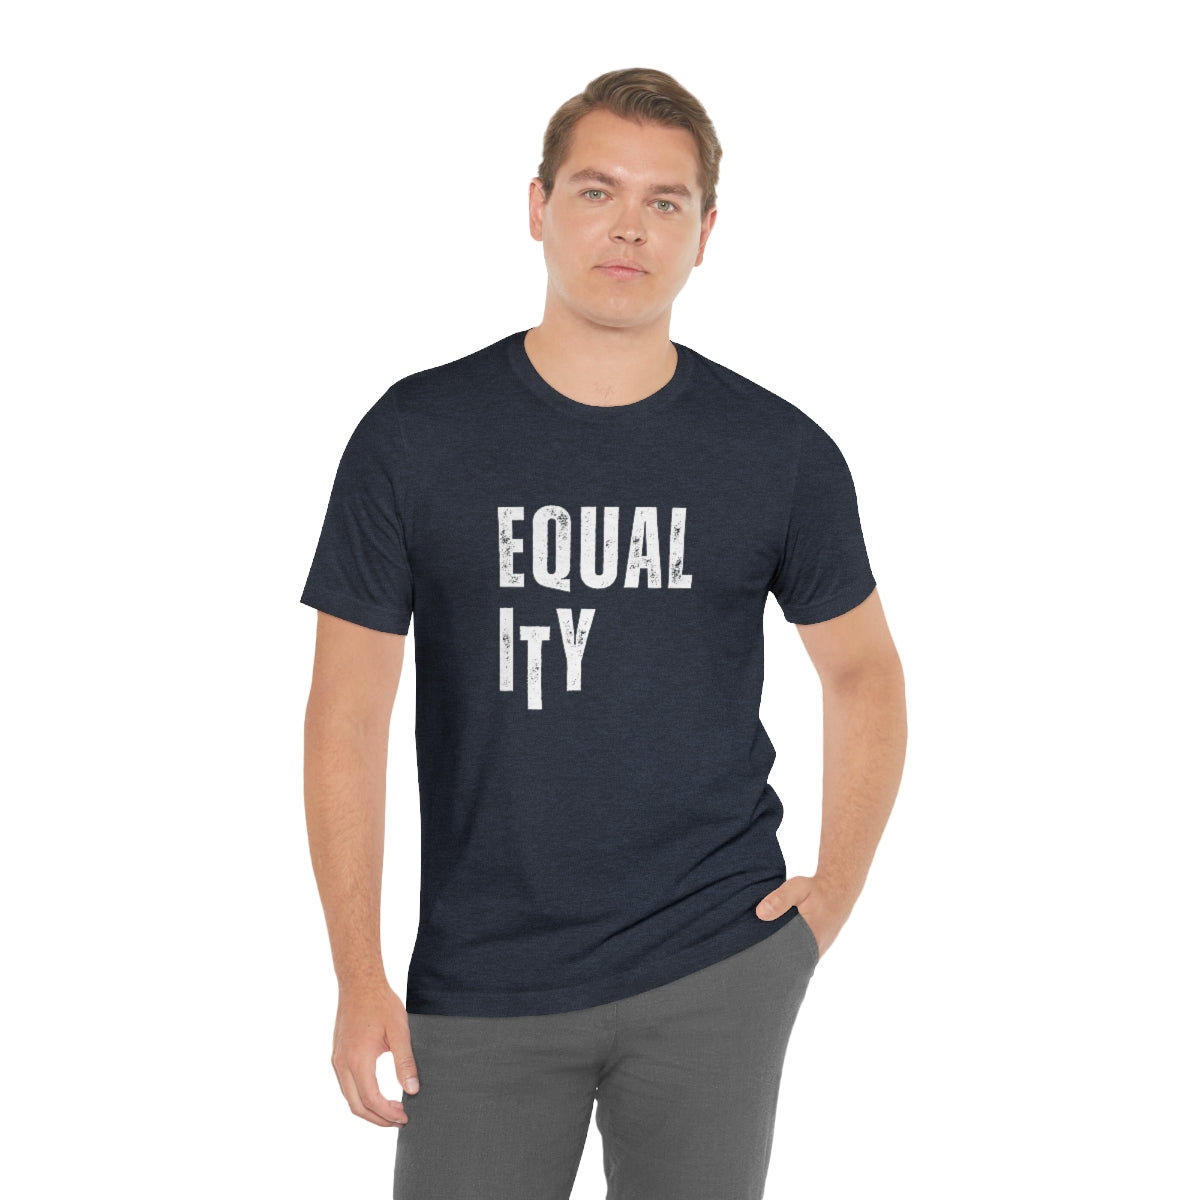 Equality T Shirt, Statement Tees, Equality Tees, Equality, Diversity, Equity, Inclusion Tops